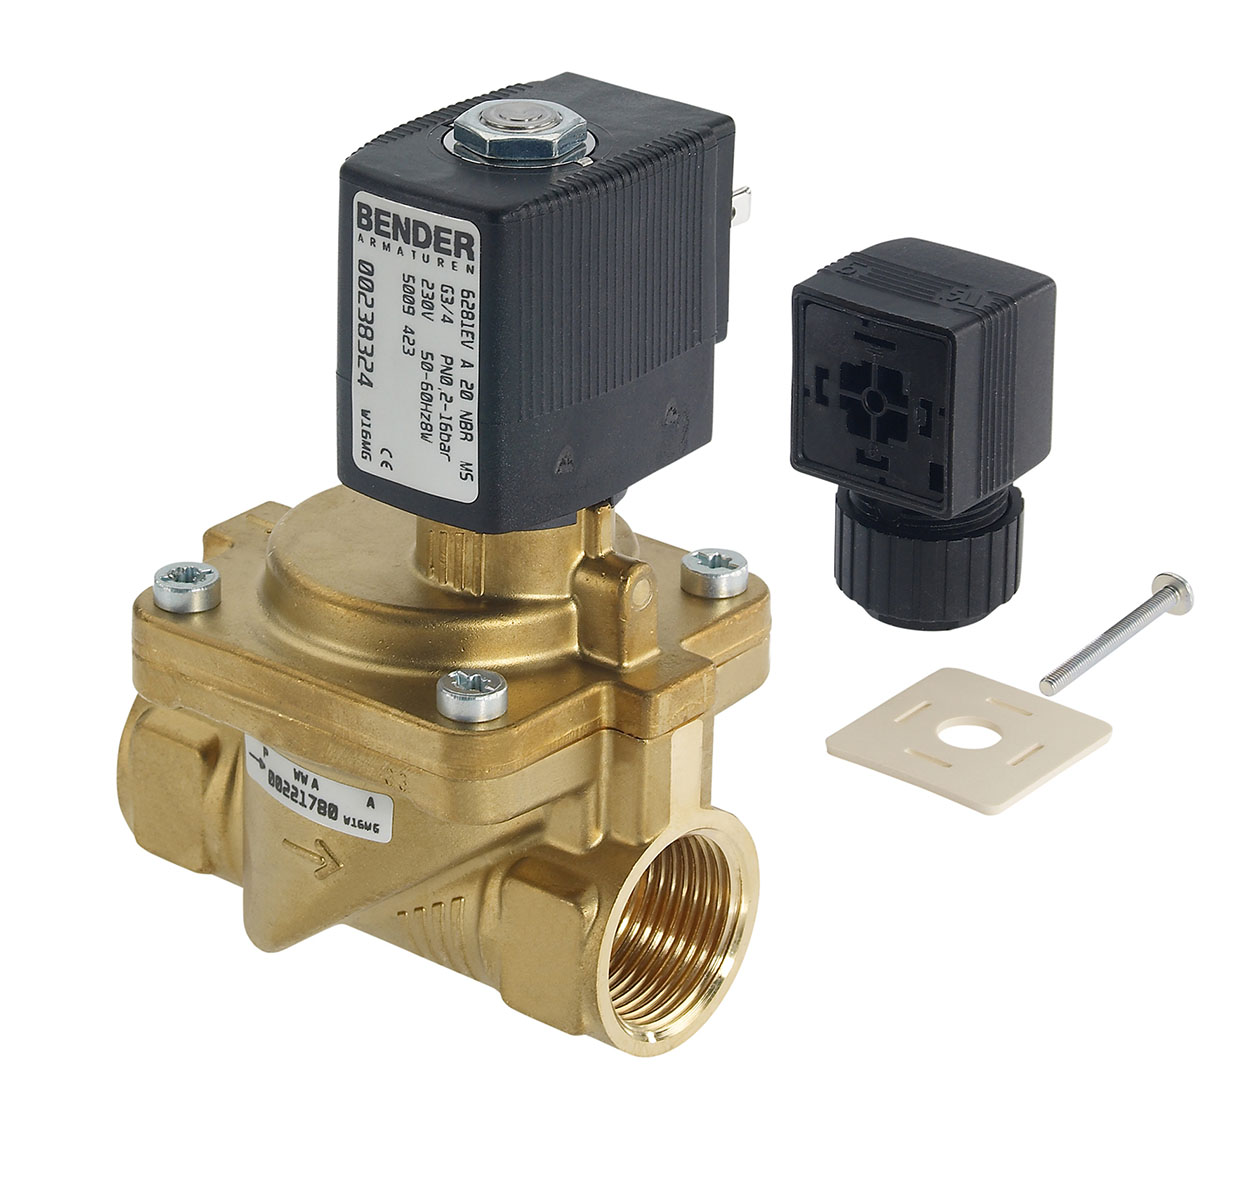 5009425 - 2/2 way solenoid valve normally closed for fluids and compressed air Type 3; female thread